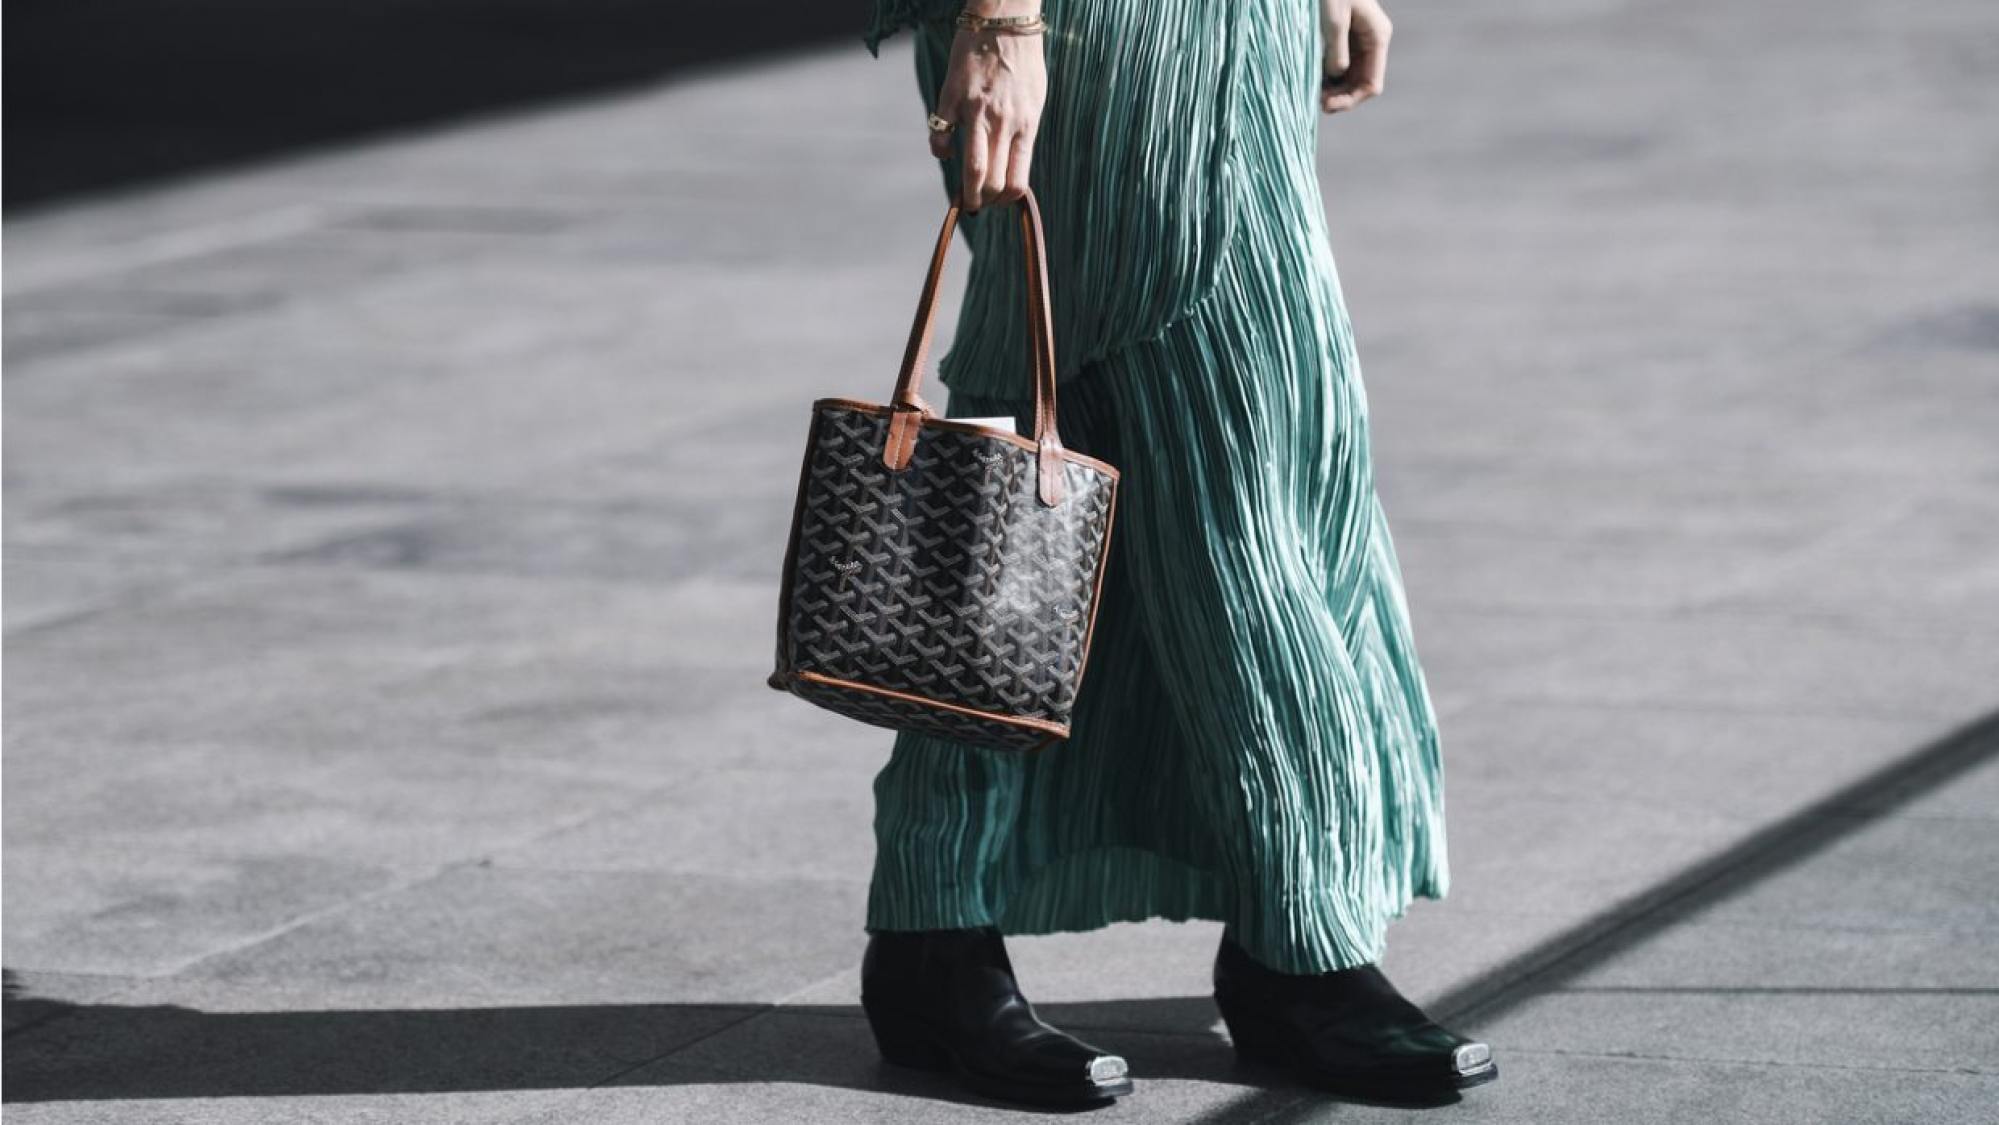 LVMH to Hire 25,000 Young Workers to Help Appeal to Gen Z Shoppers